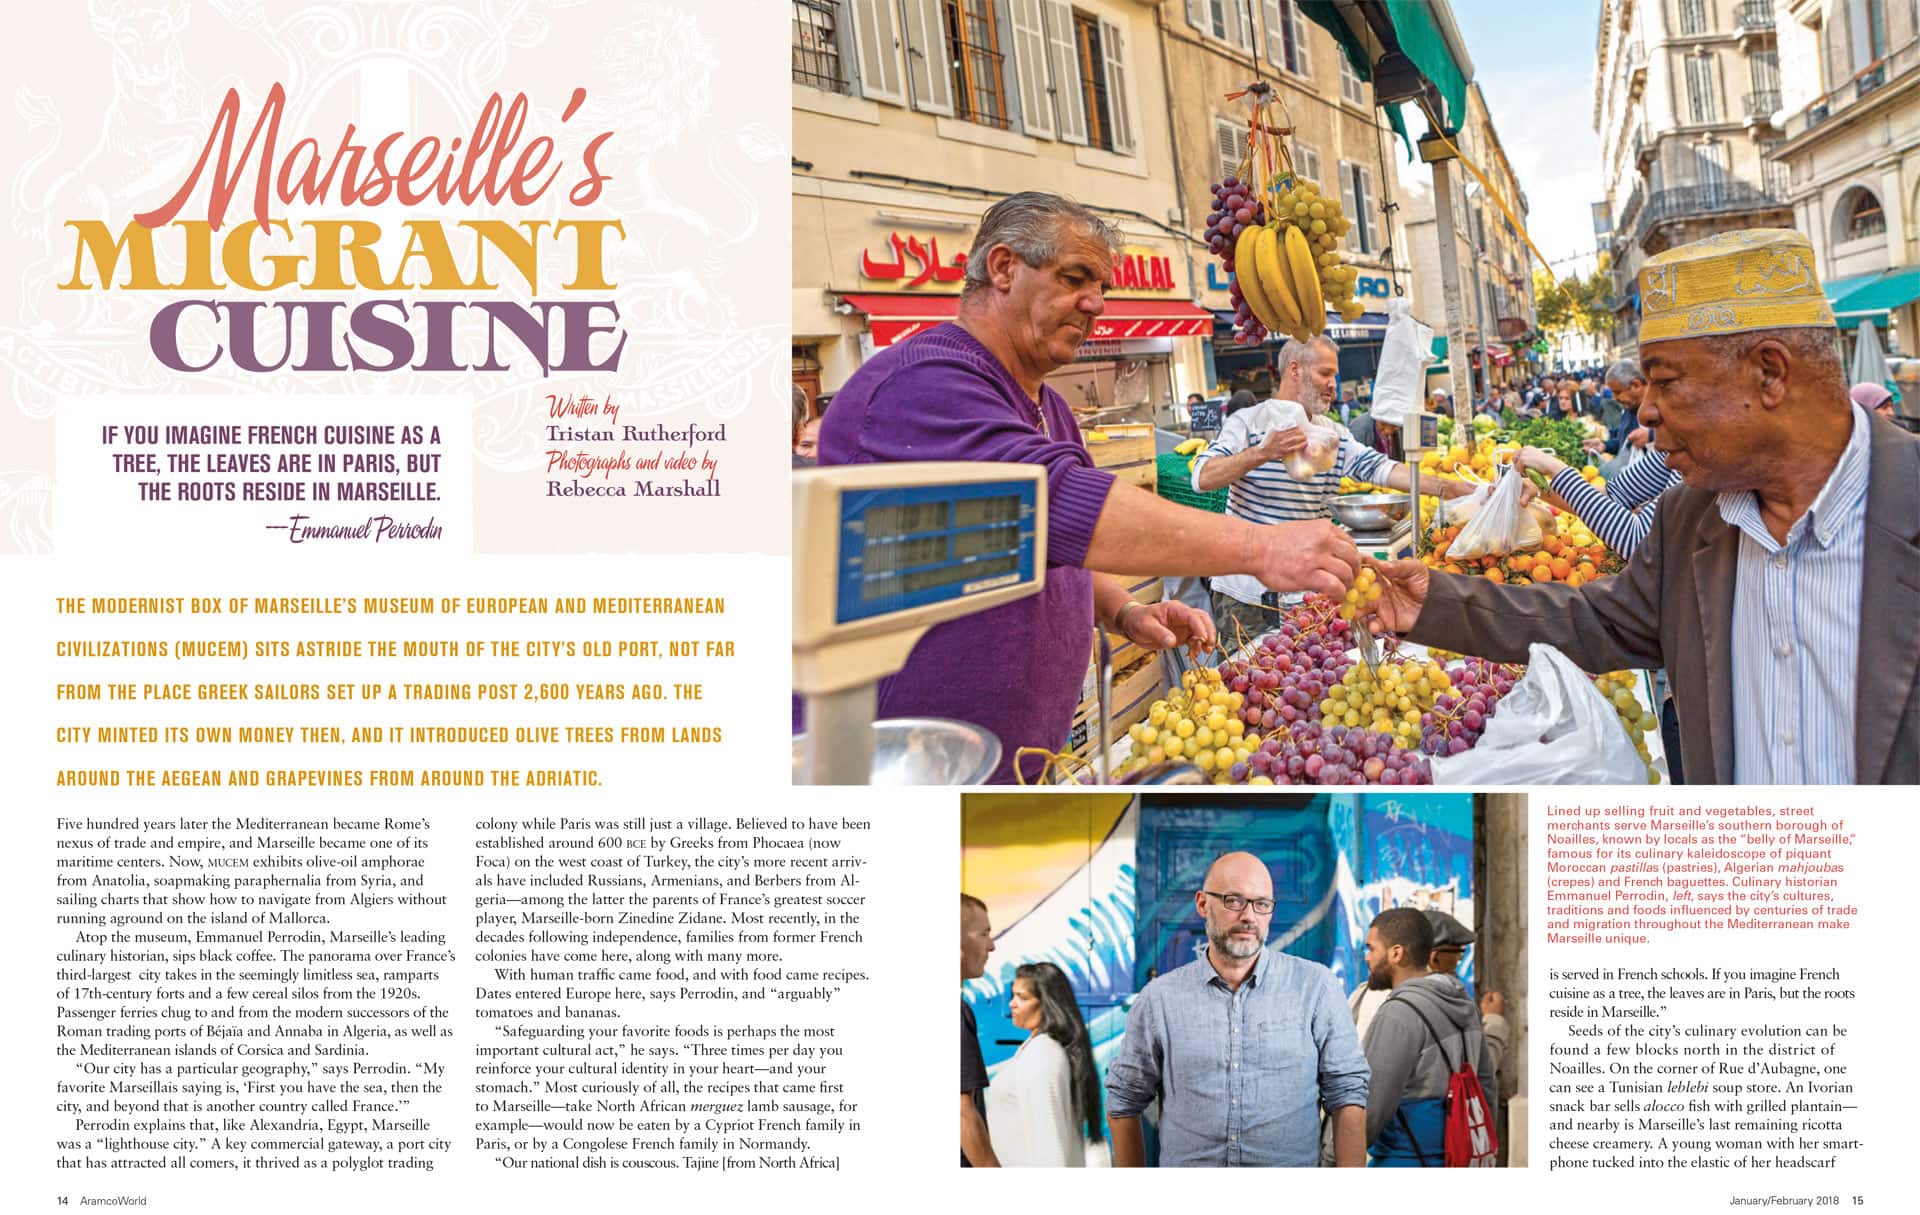 Double page magazien spread showing 2 photographs, one of a market trader selling grapes to a man in a hat, the other a portrait of a man in blue shirt